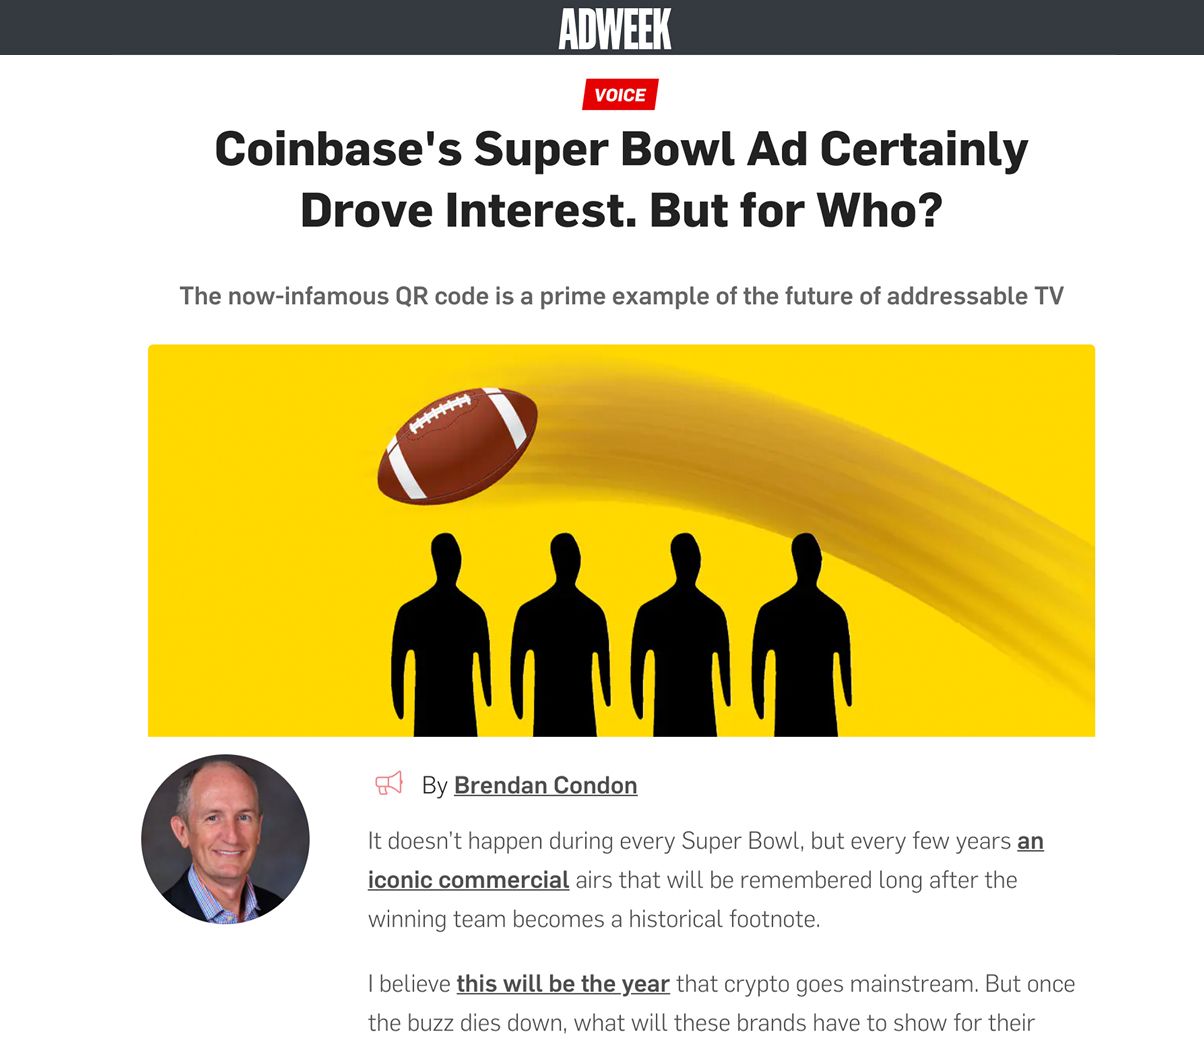 Adweek: Captify’s Global CRO, Brendan Condon—Coinbase’s Super Bowl Ad Certainly Drove Interest. But for Who?